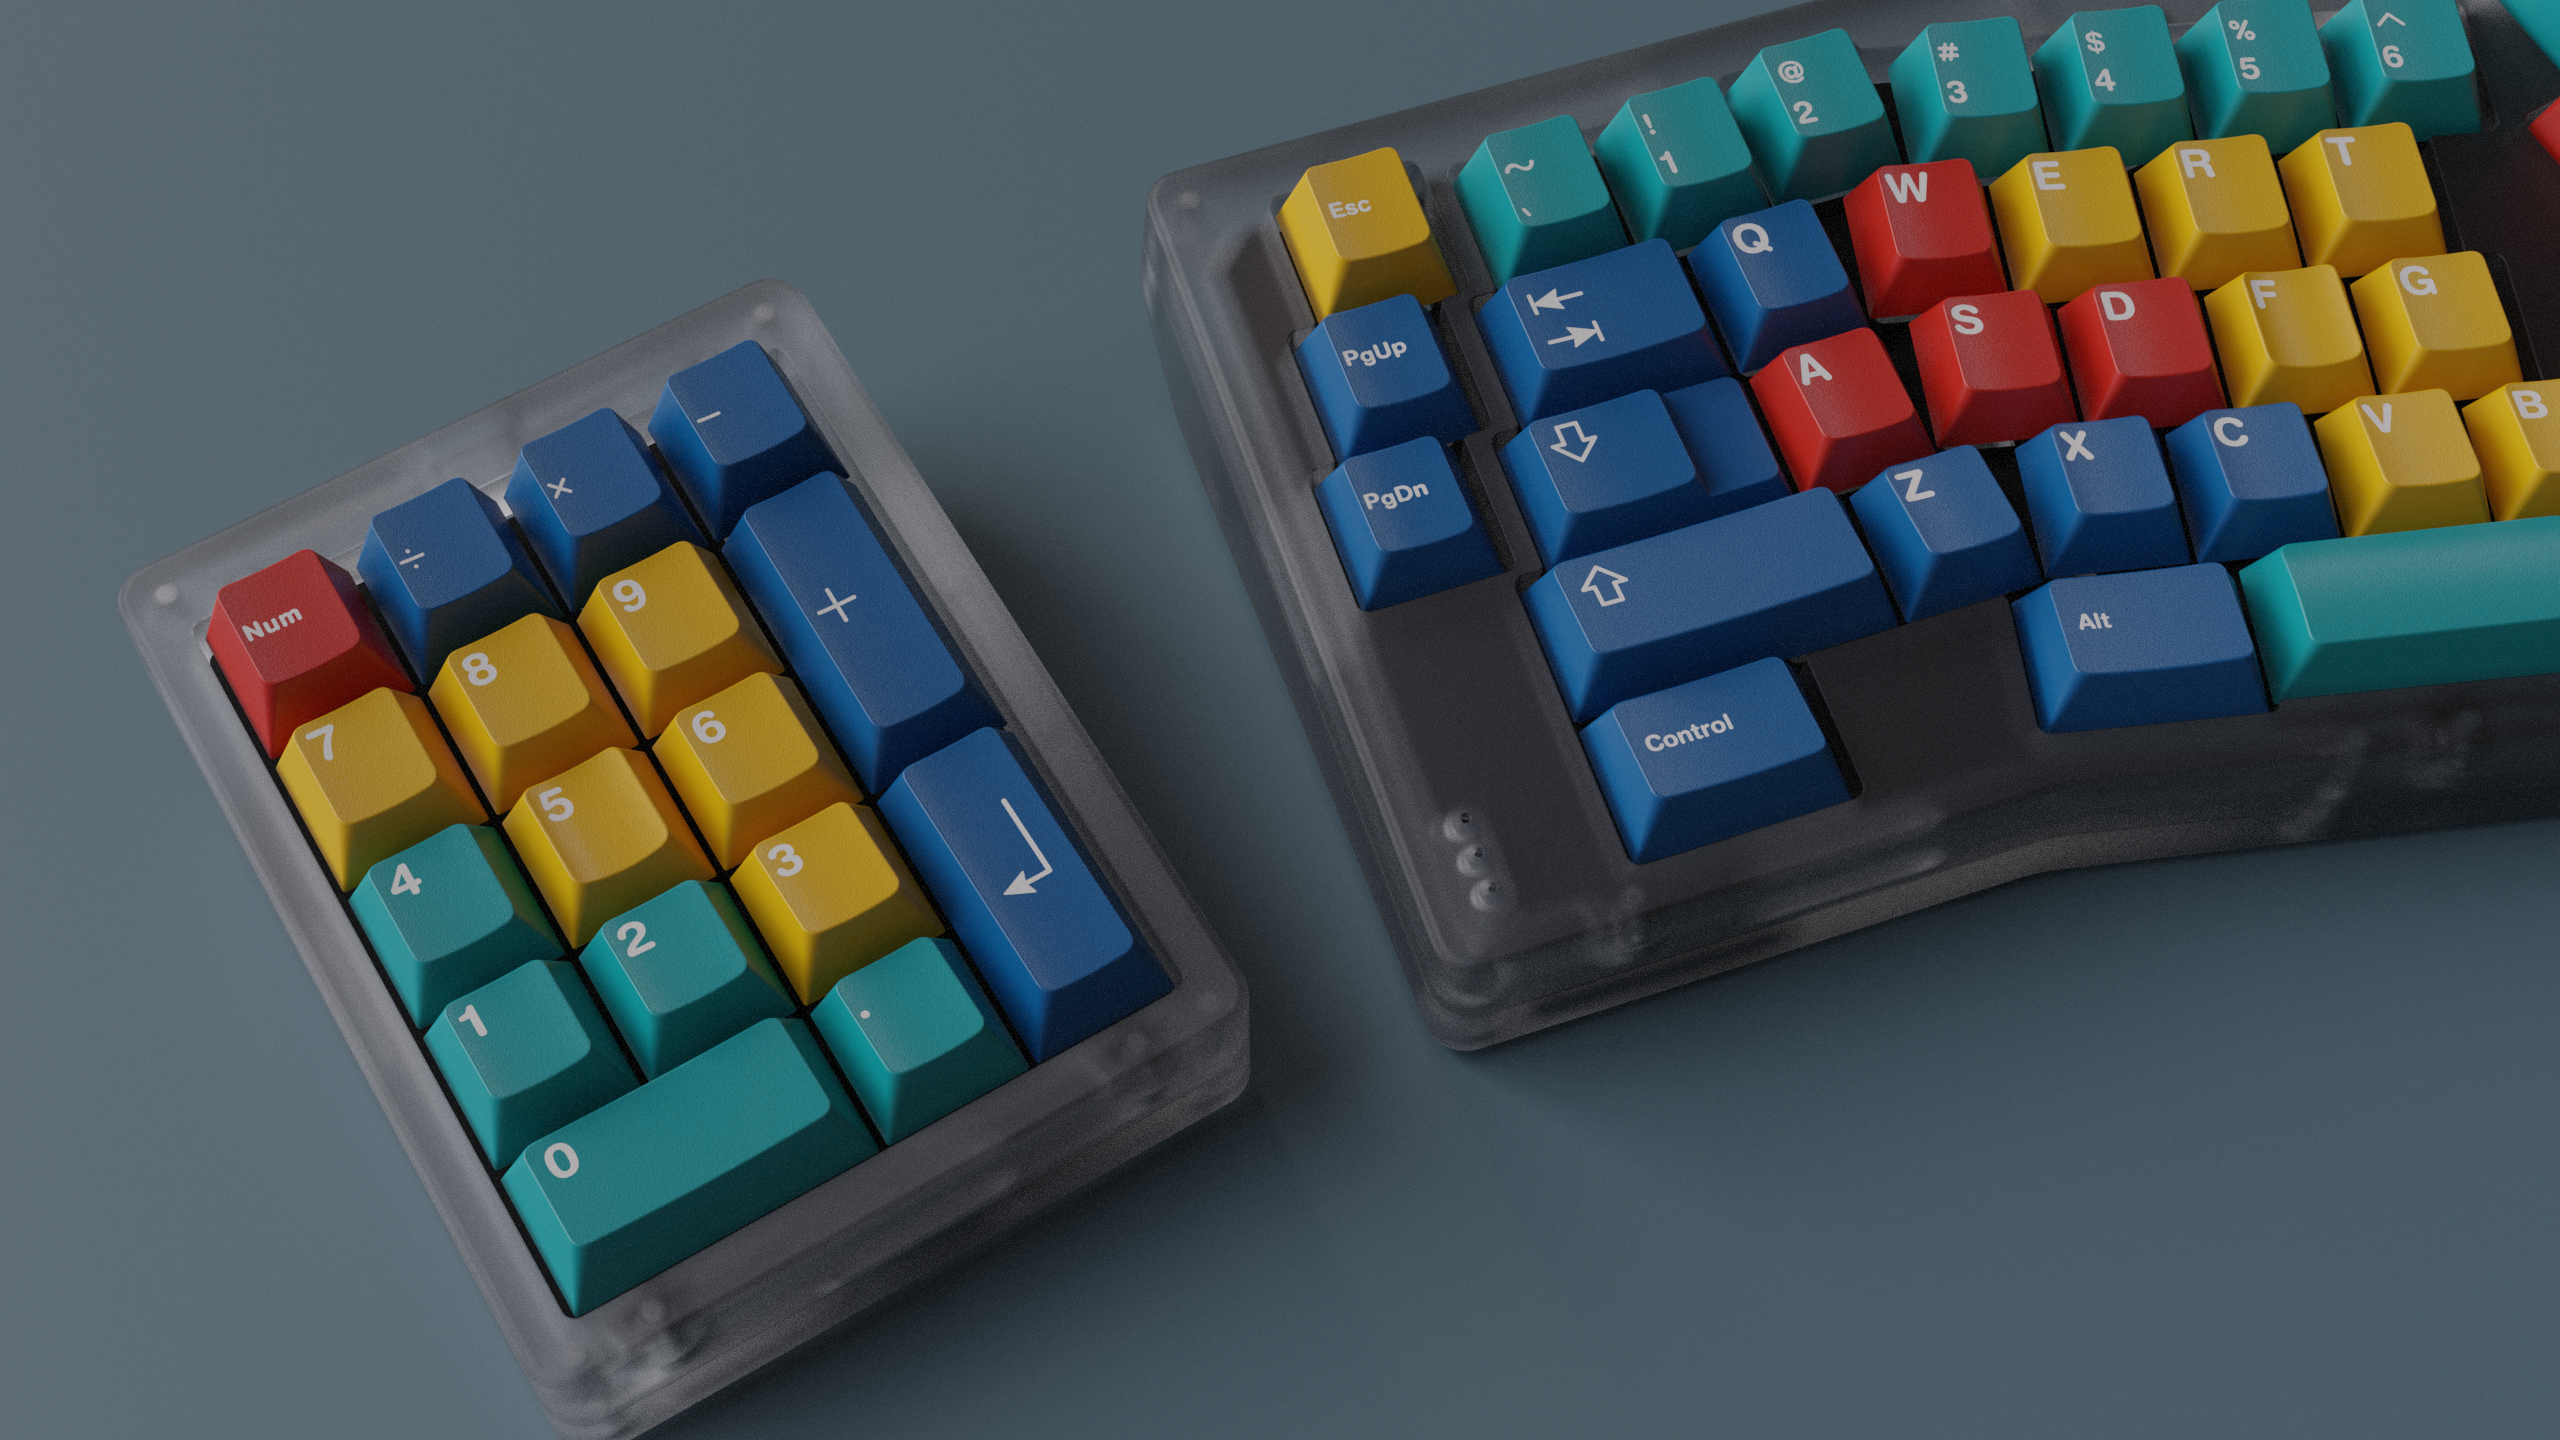 General 2560x1440 keyboards qwerty technology table keycap prototypes simple background closeup